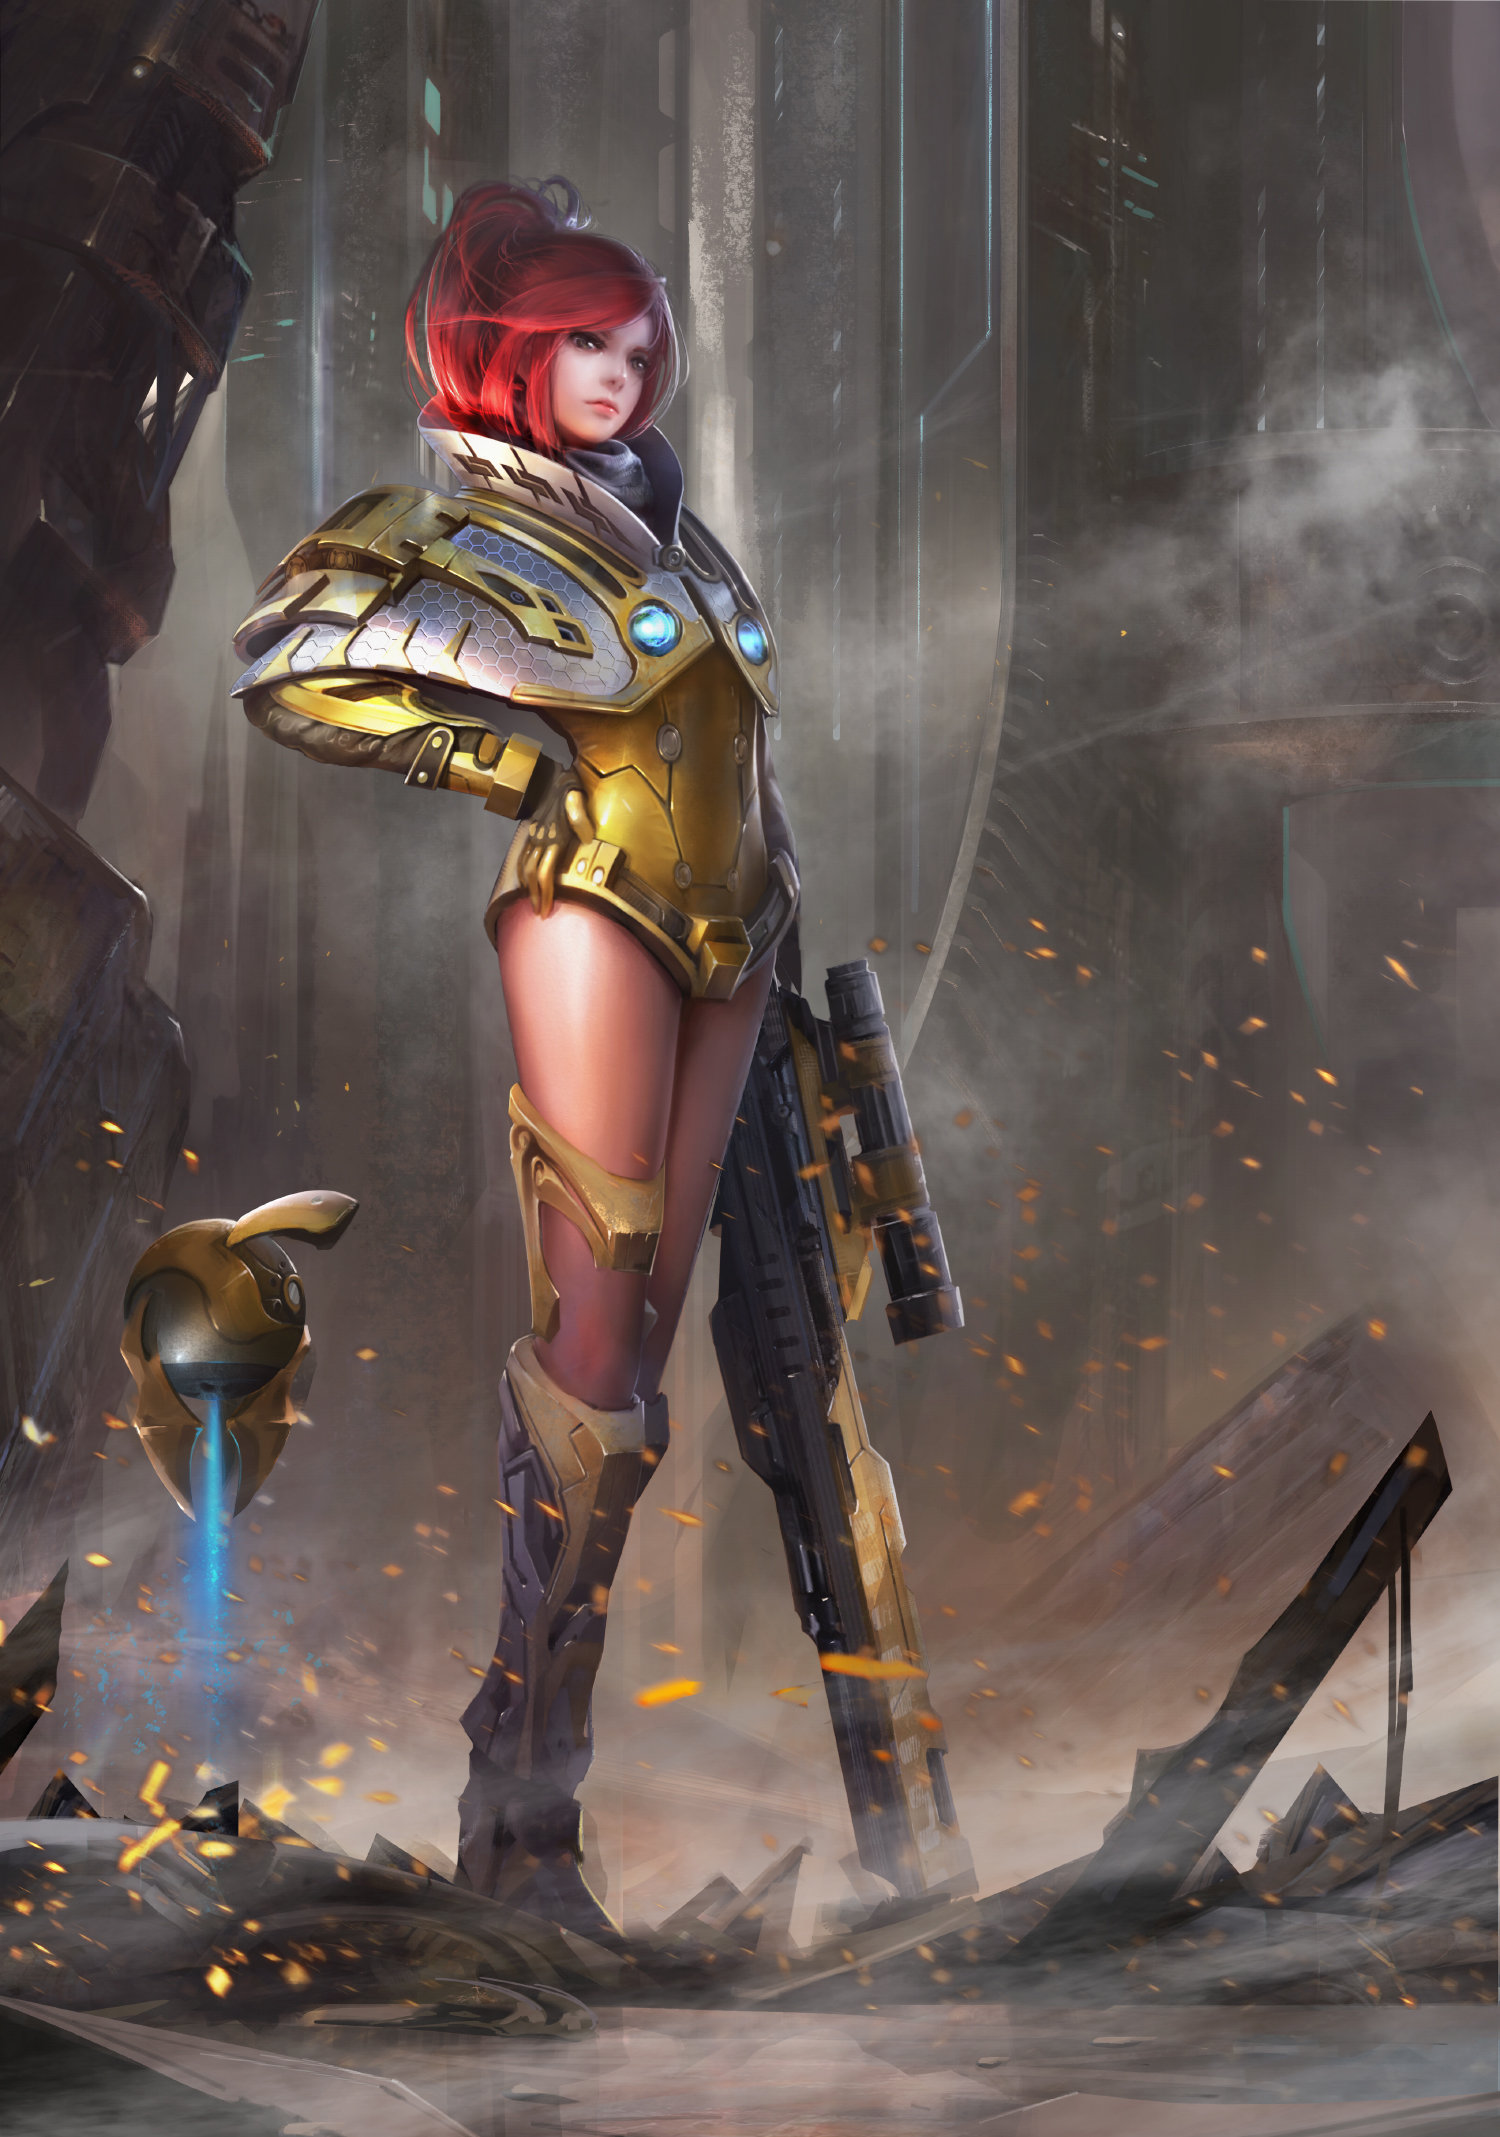 General 1500x2137 Yue Yue drawing redhead long hair ponytail armor gold suits weapon sniper rifle sparks science fiction